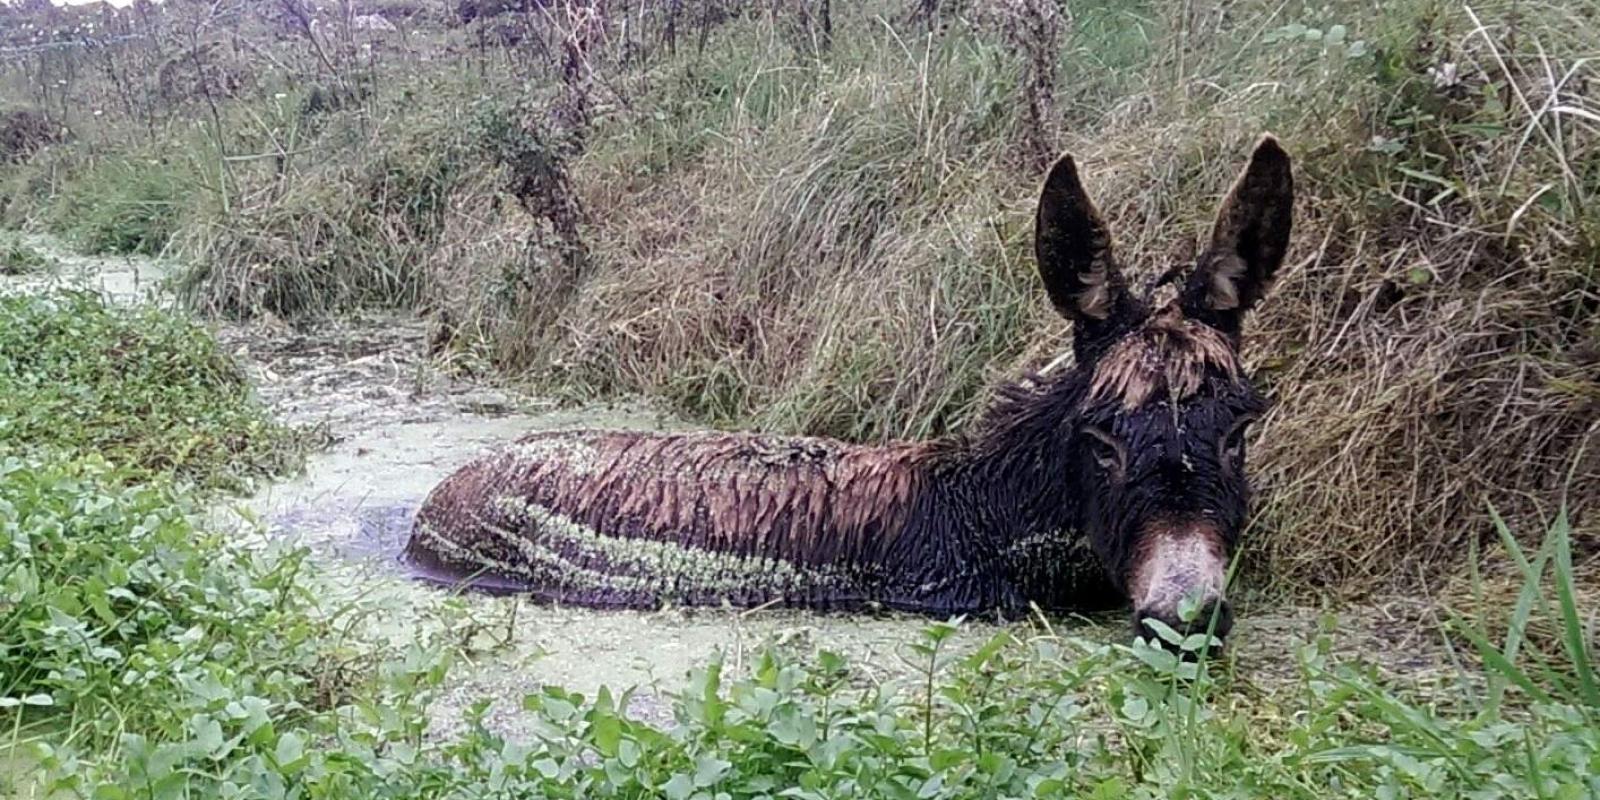 Roma rescued from a water filled bog